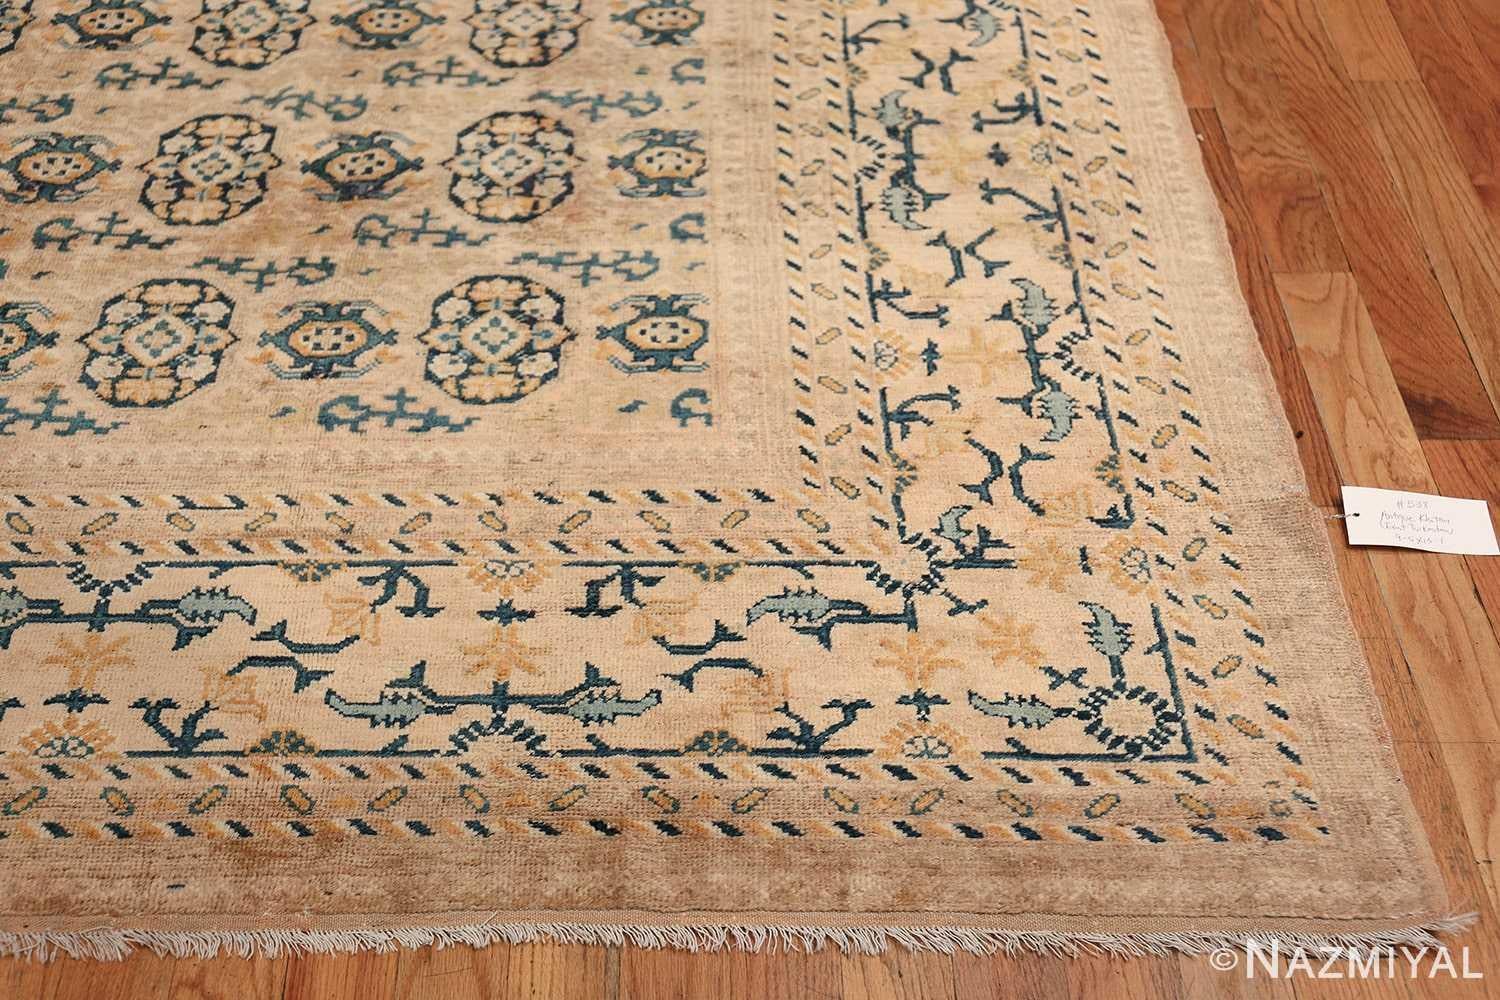 Wool Rare and Extremely Decorative Antique Room Size Khotan Rug 9'5